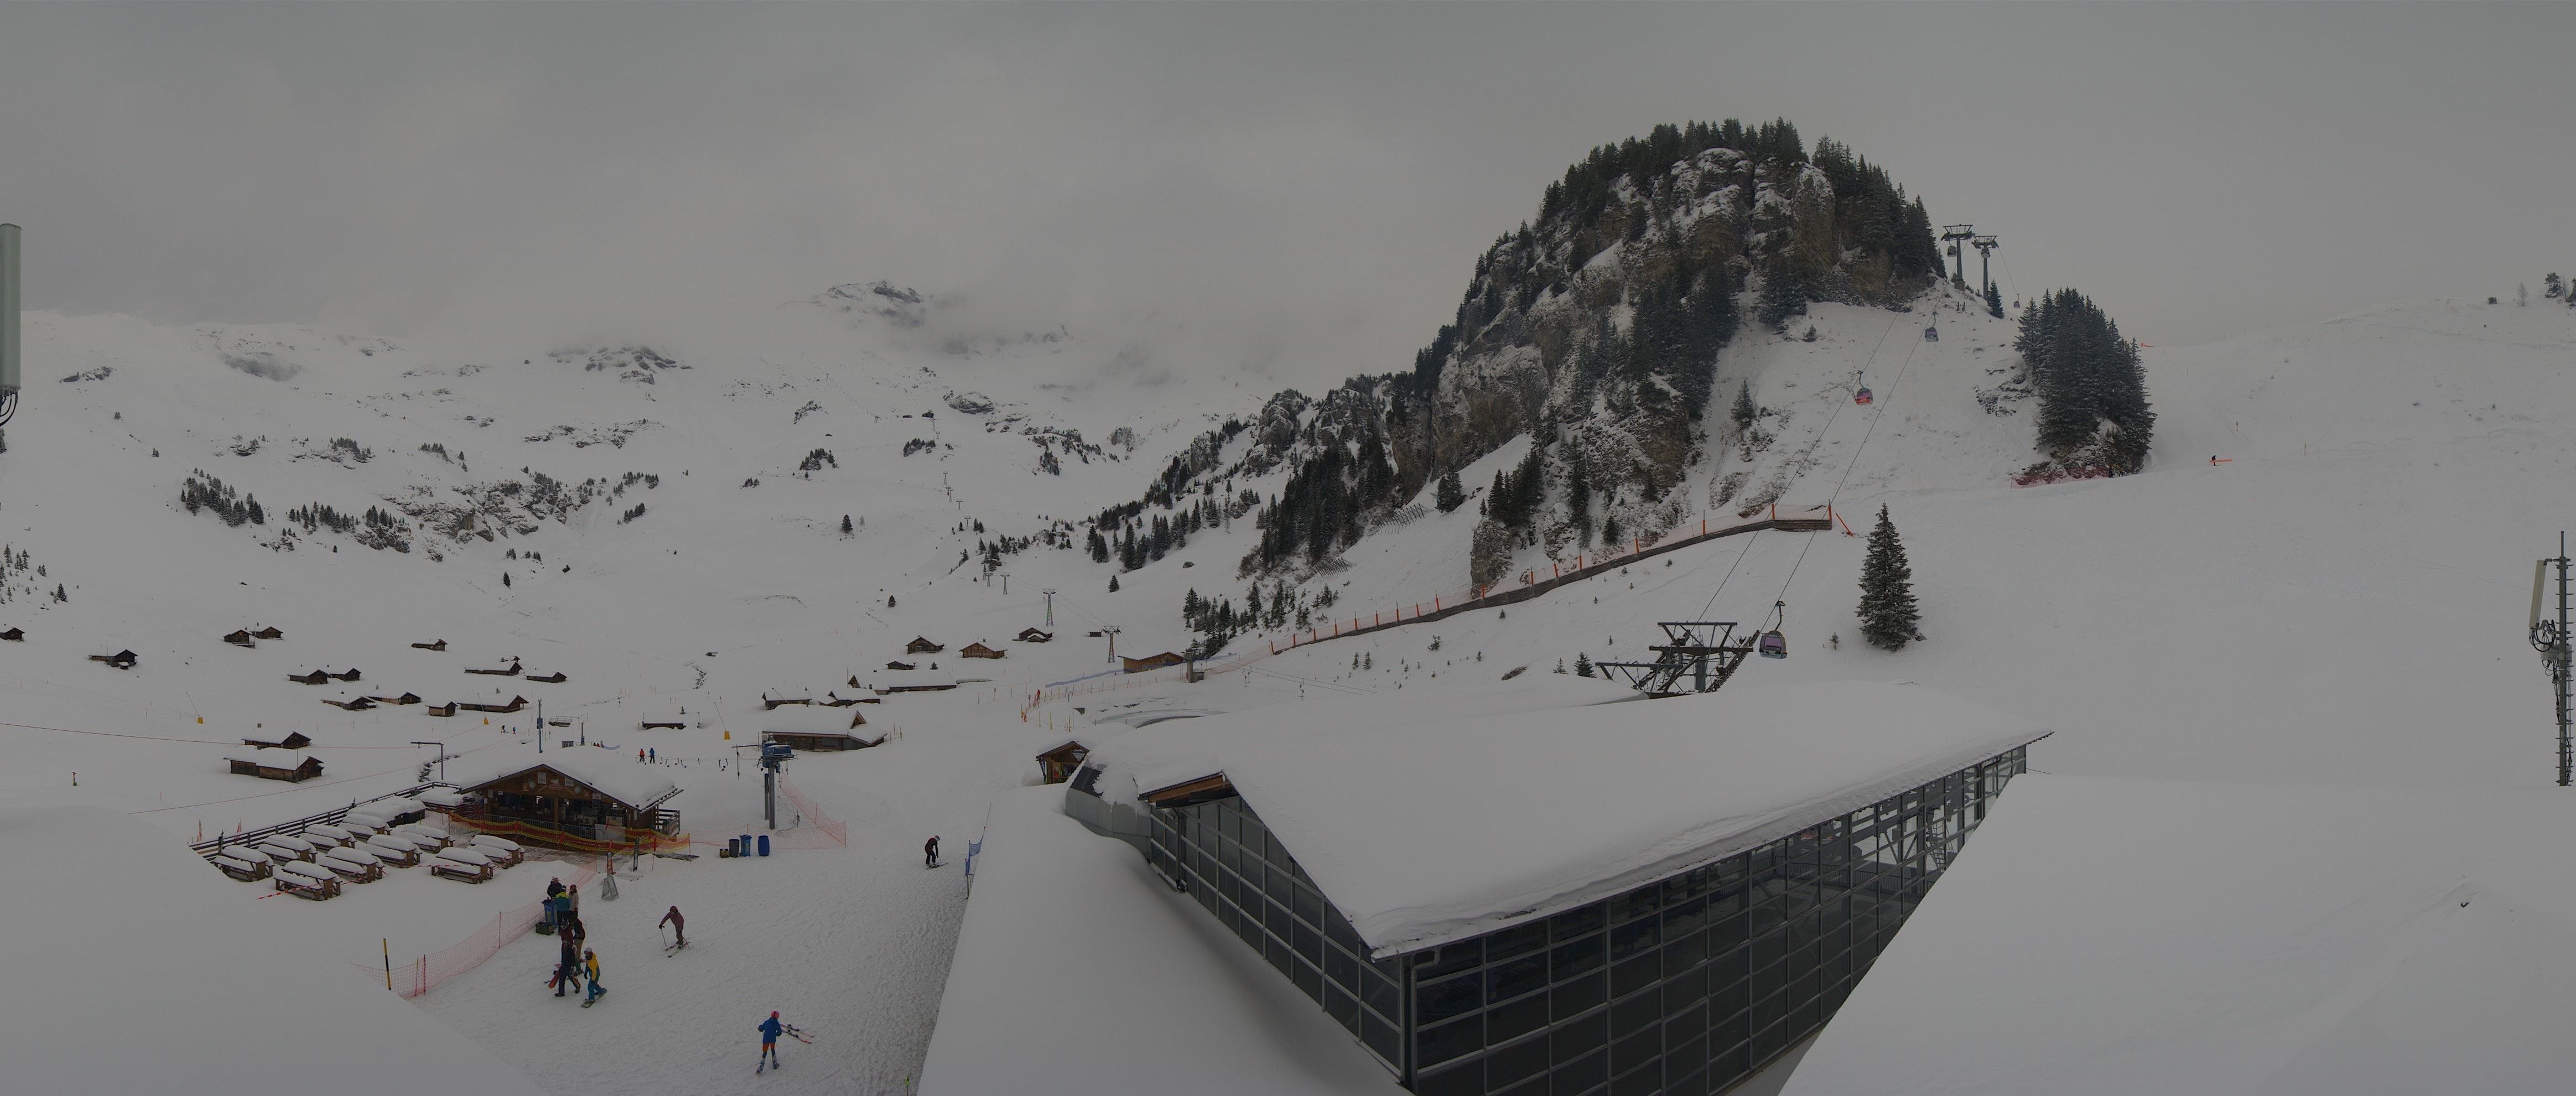 After a quiet morning it can start to snow again in the course of the afternoon, like here in Meiringen-Hasliberg